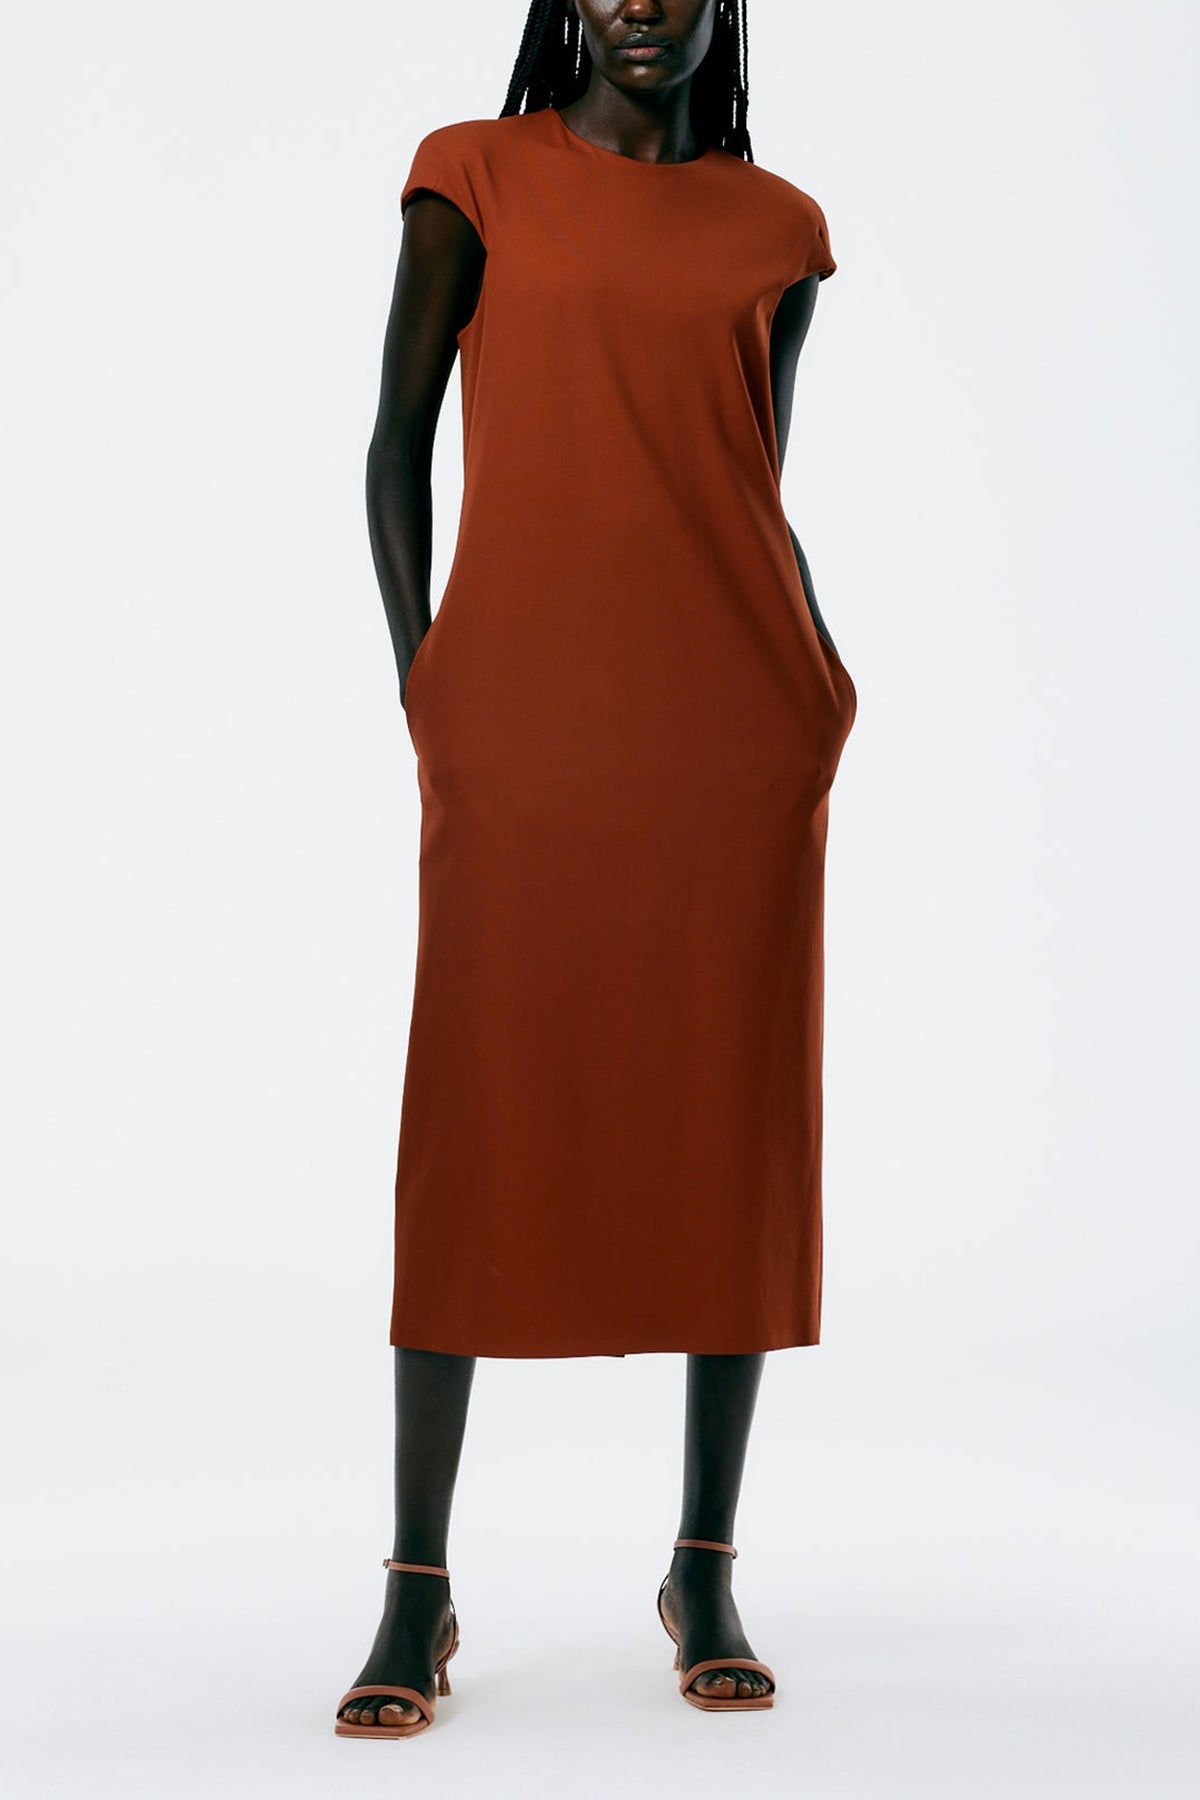 Compact Ultra Stretch Knit Lean Sleeveless Dress in Redwood - shop-olivia.com